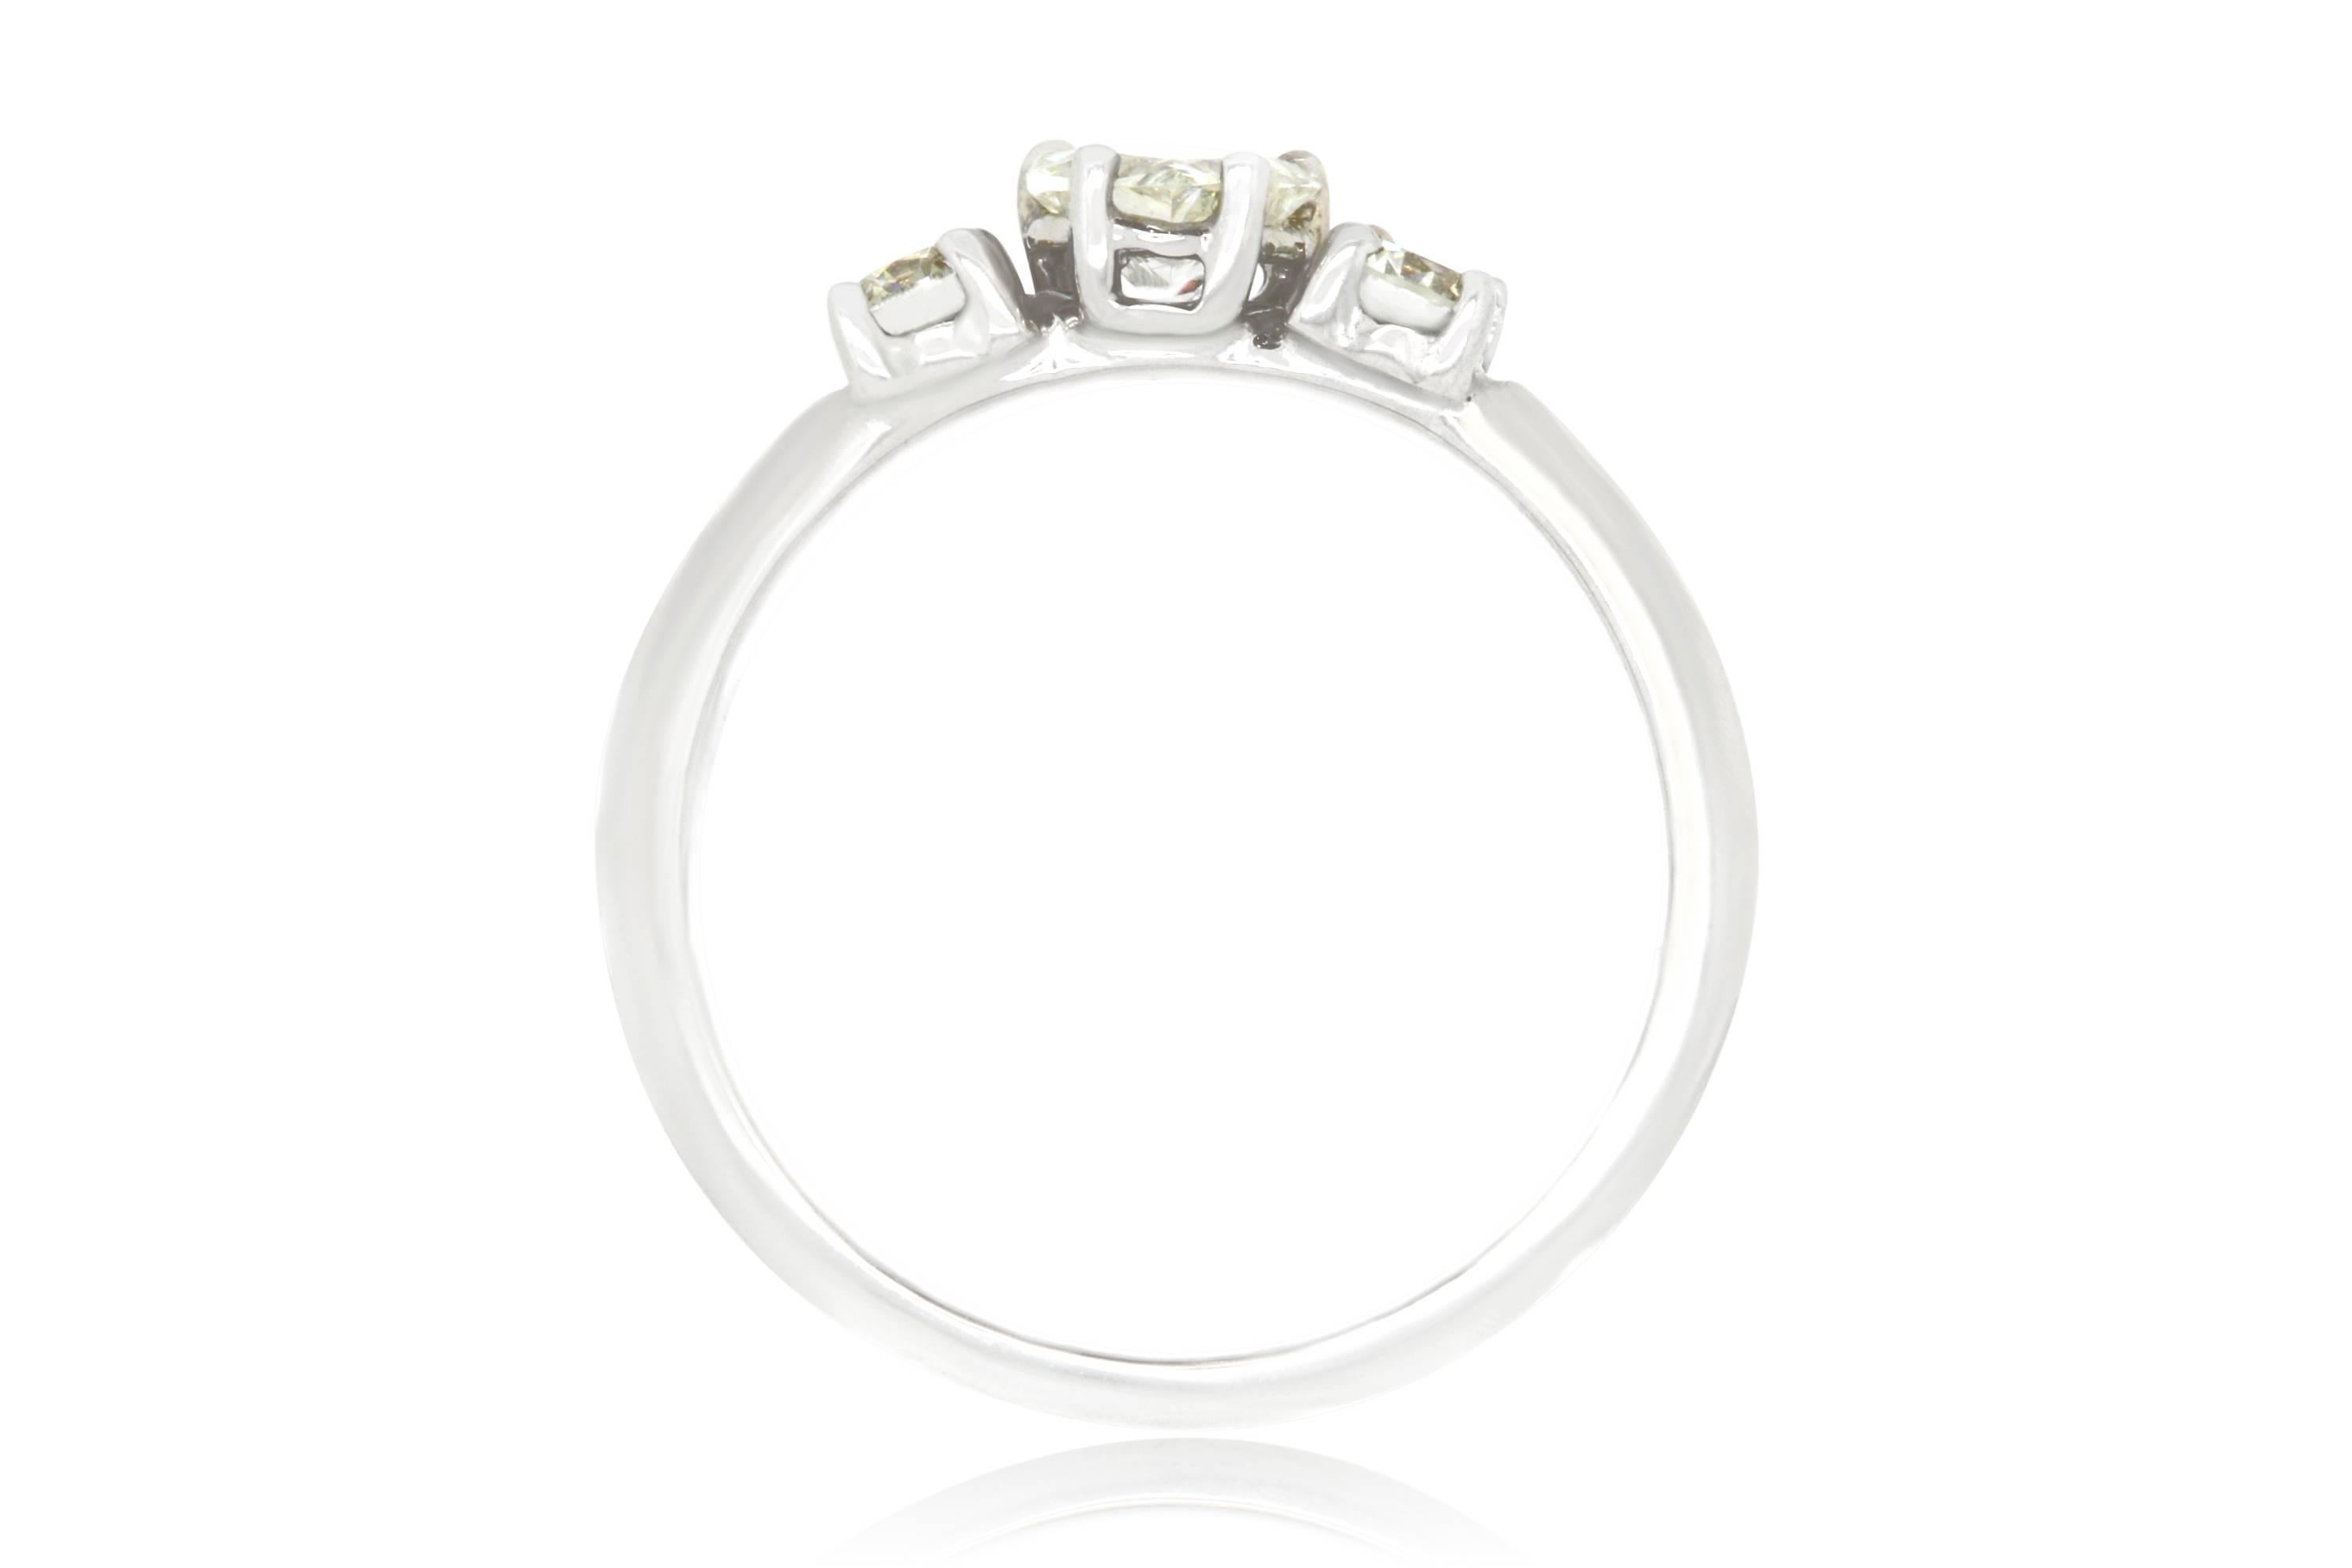 This three-stone diamond ring is just the sweetest dainty diamond ring you can image.  A 0.40 Carat heart shaped White Diamond is bookended by two round White Diamonds at 0.31 Carats.  

Material: 14k White Gold 
Center Stone Details: 0.41 Carat